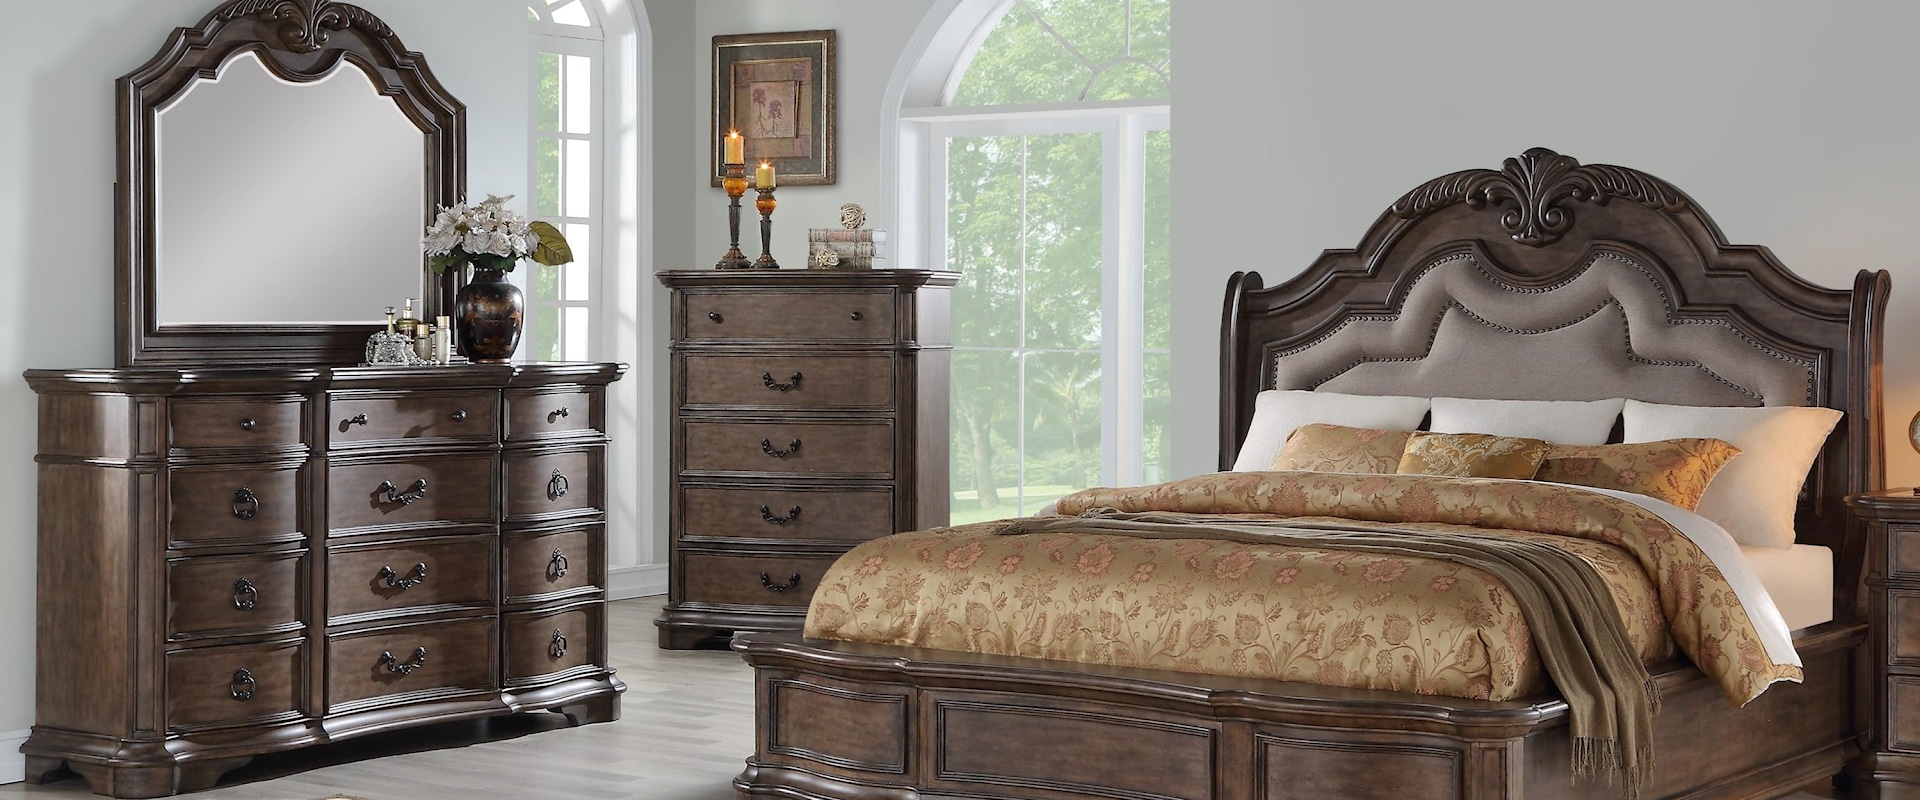 Queen 5-PC Bedroom Group Including Dresser, Mirror and Complete Queen Bed, Headboard, Footboard and Rails